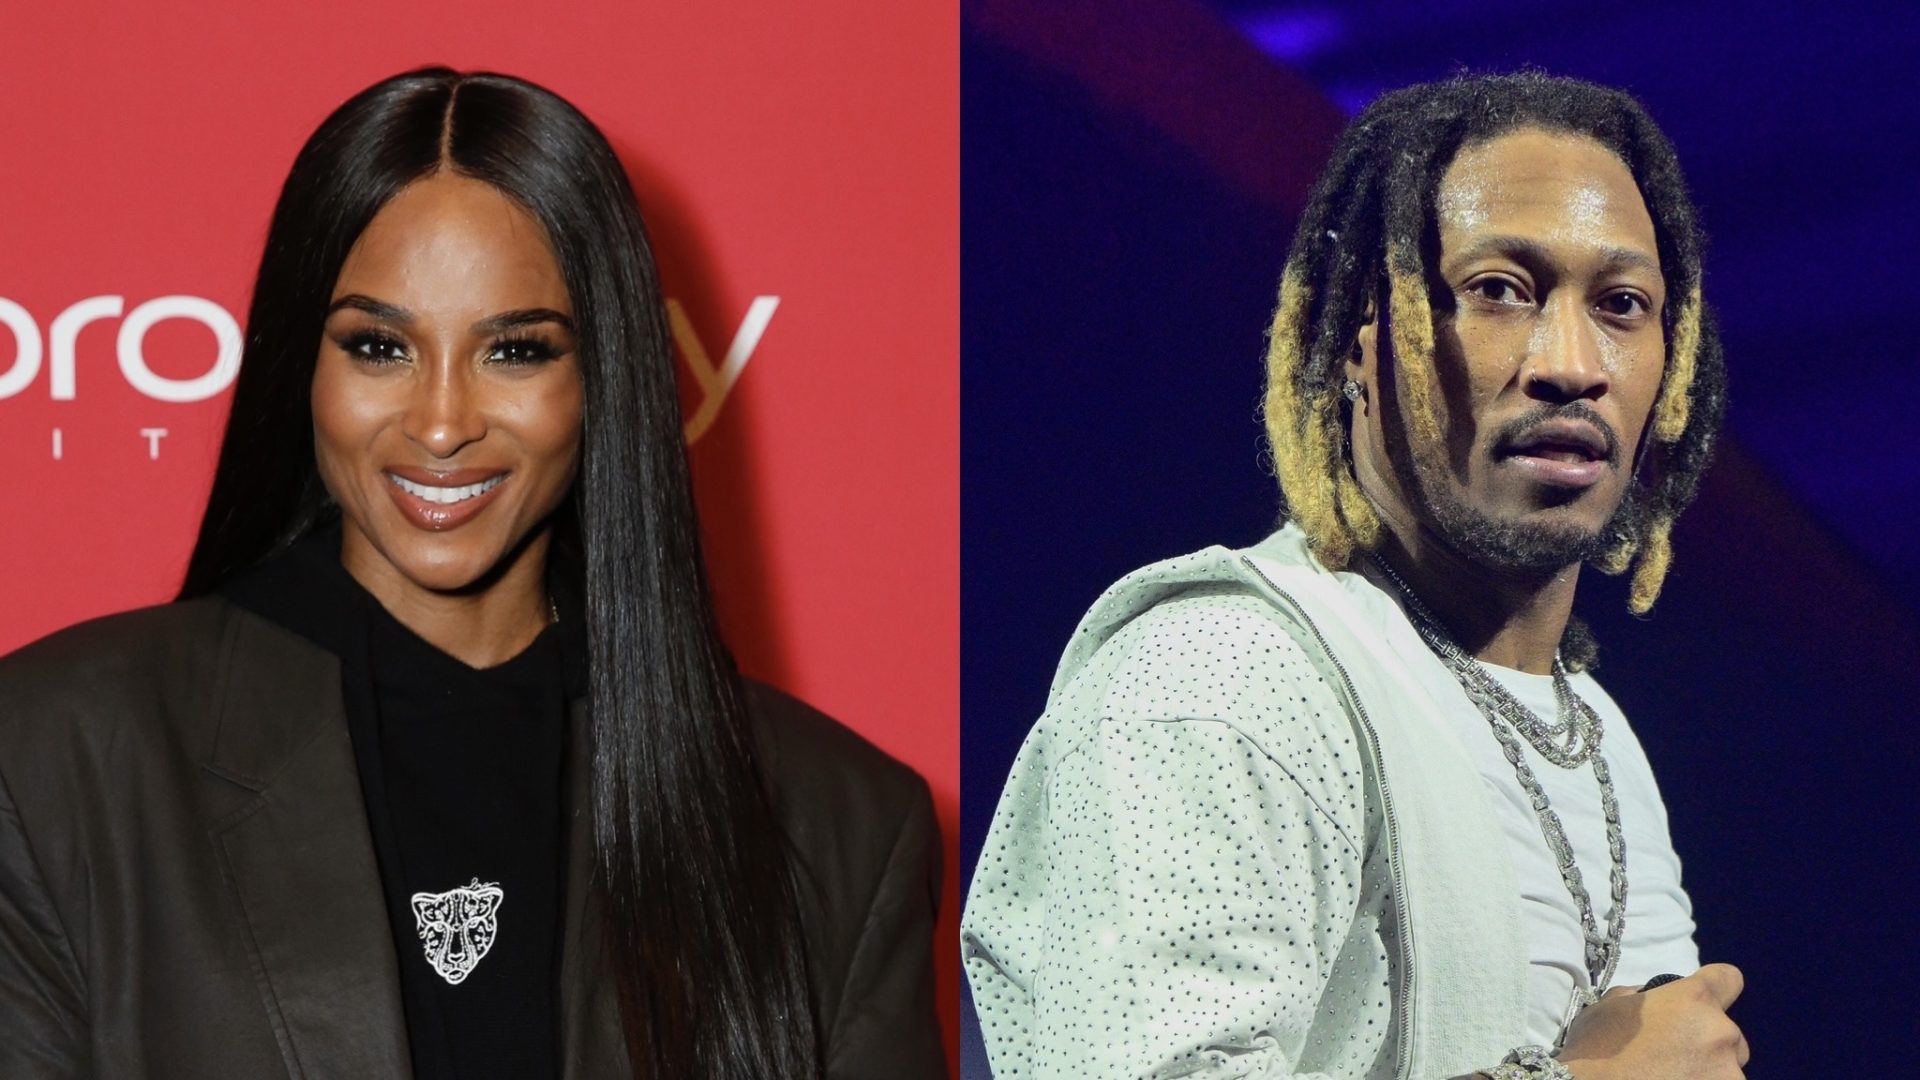 Ciara Speaks on Moment She Knew It Was Time to End Relationship With Future